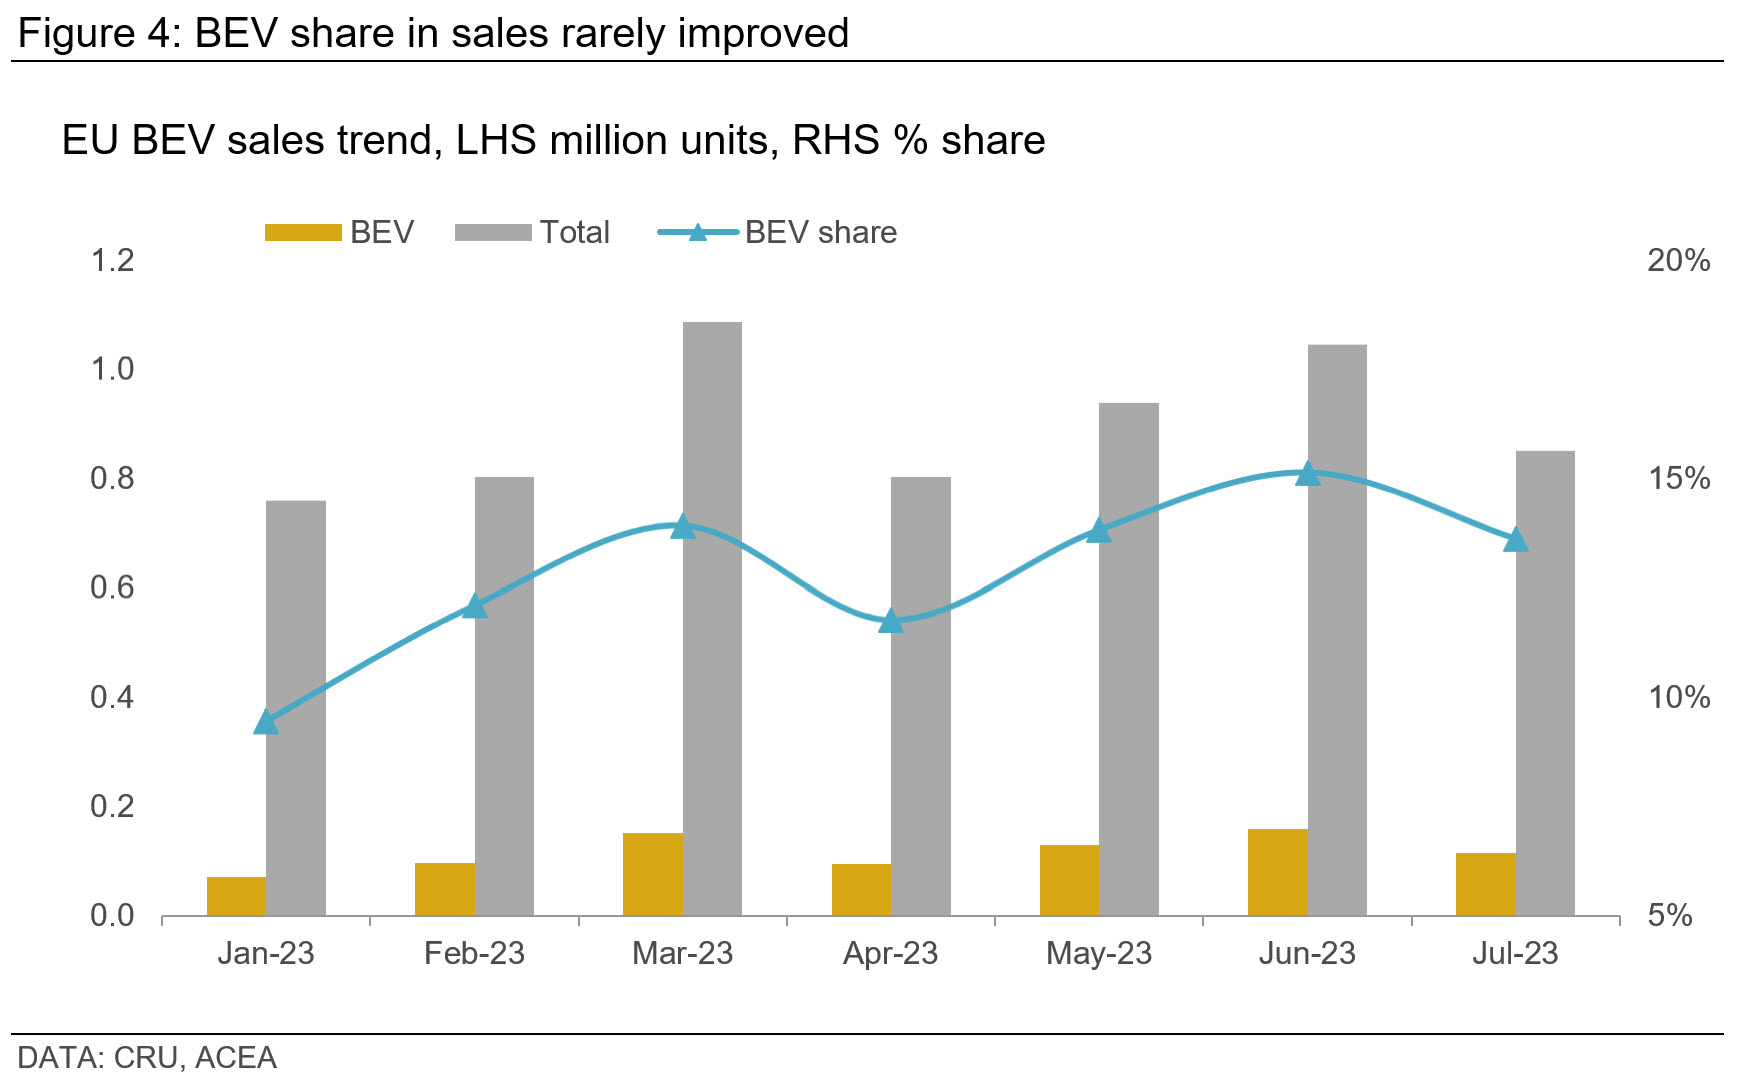 Graph showing that BEV share in sales rarely improved